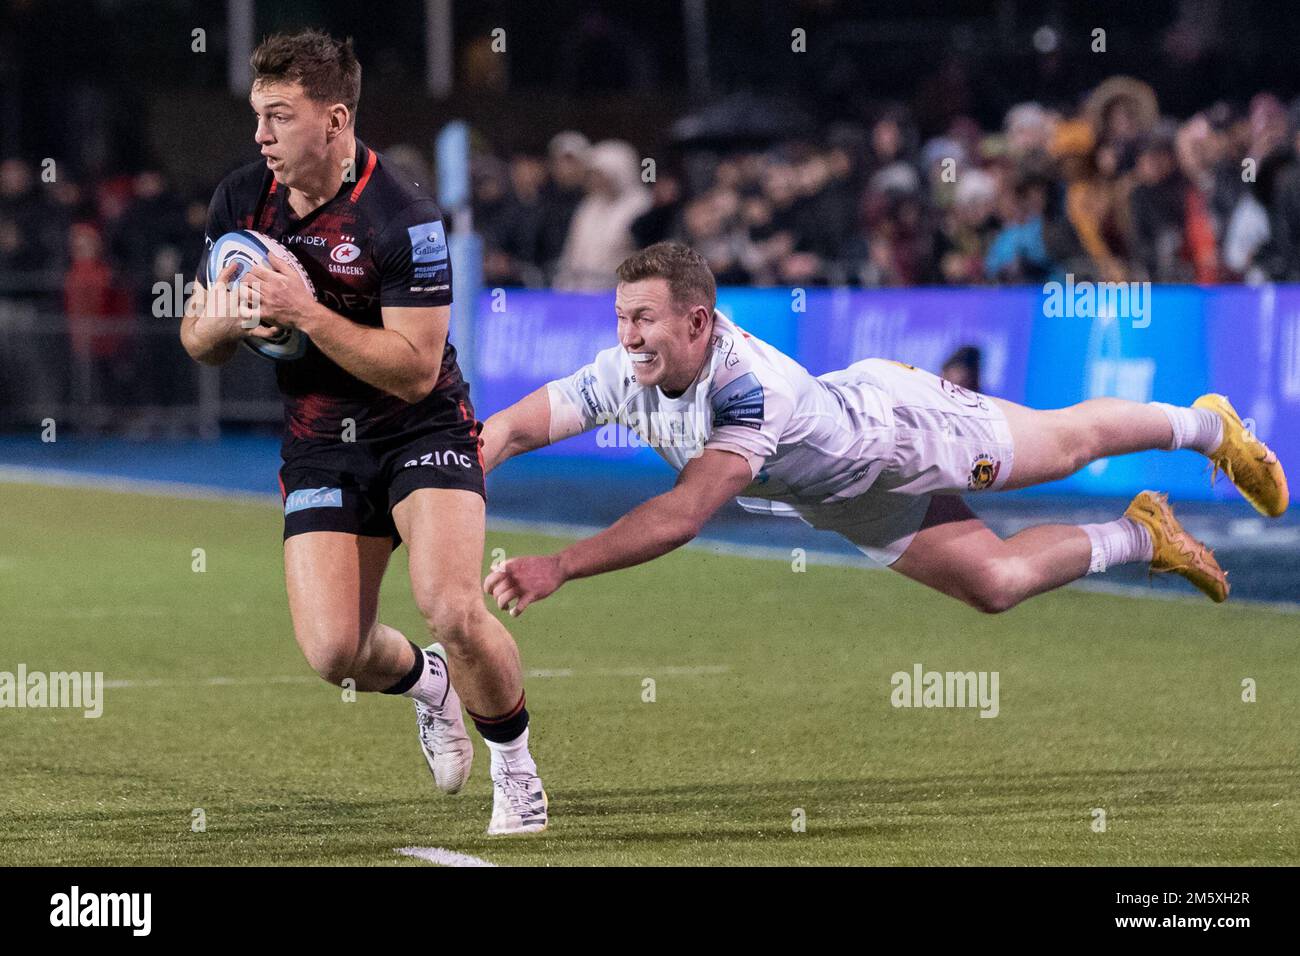 Alex Lewington #23 of Saracens evades  Rory O'Loughlin #23 of Exeter Chiefs during the Gallagher Premiership match Saracens vs Exeter Chiefs at StoneX Stadium, London, United Kingdom, 31st December 2022  (Photo by Richard Washbrooke/News Images) Stock Photo